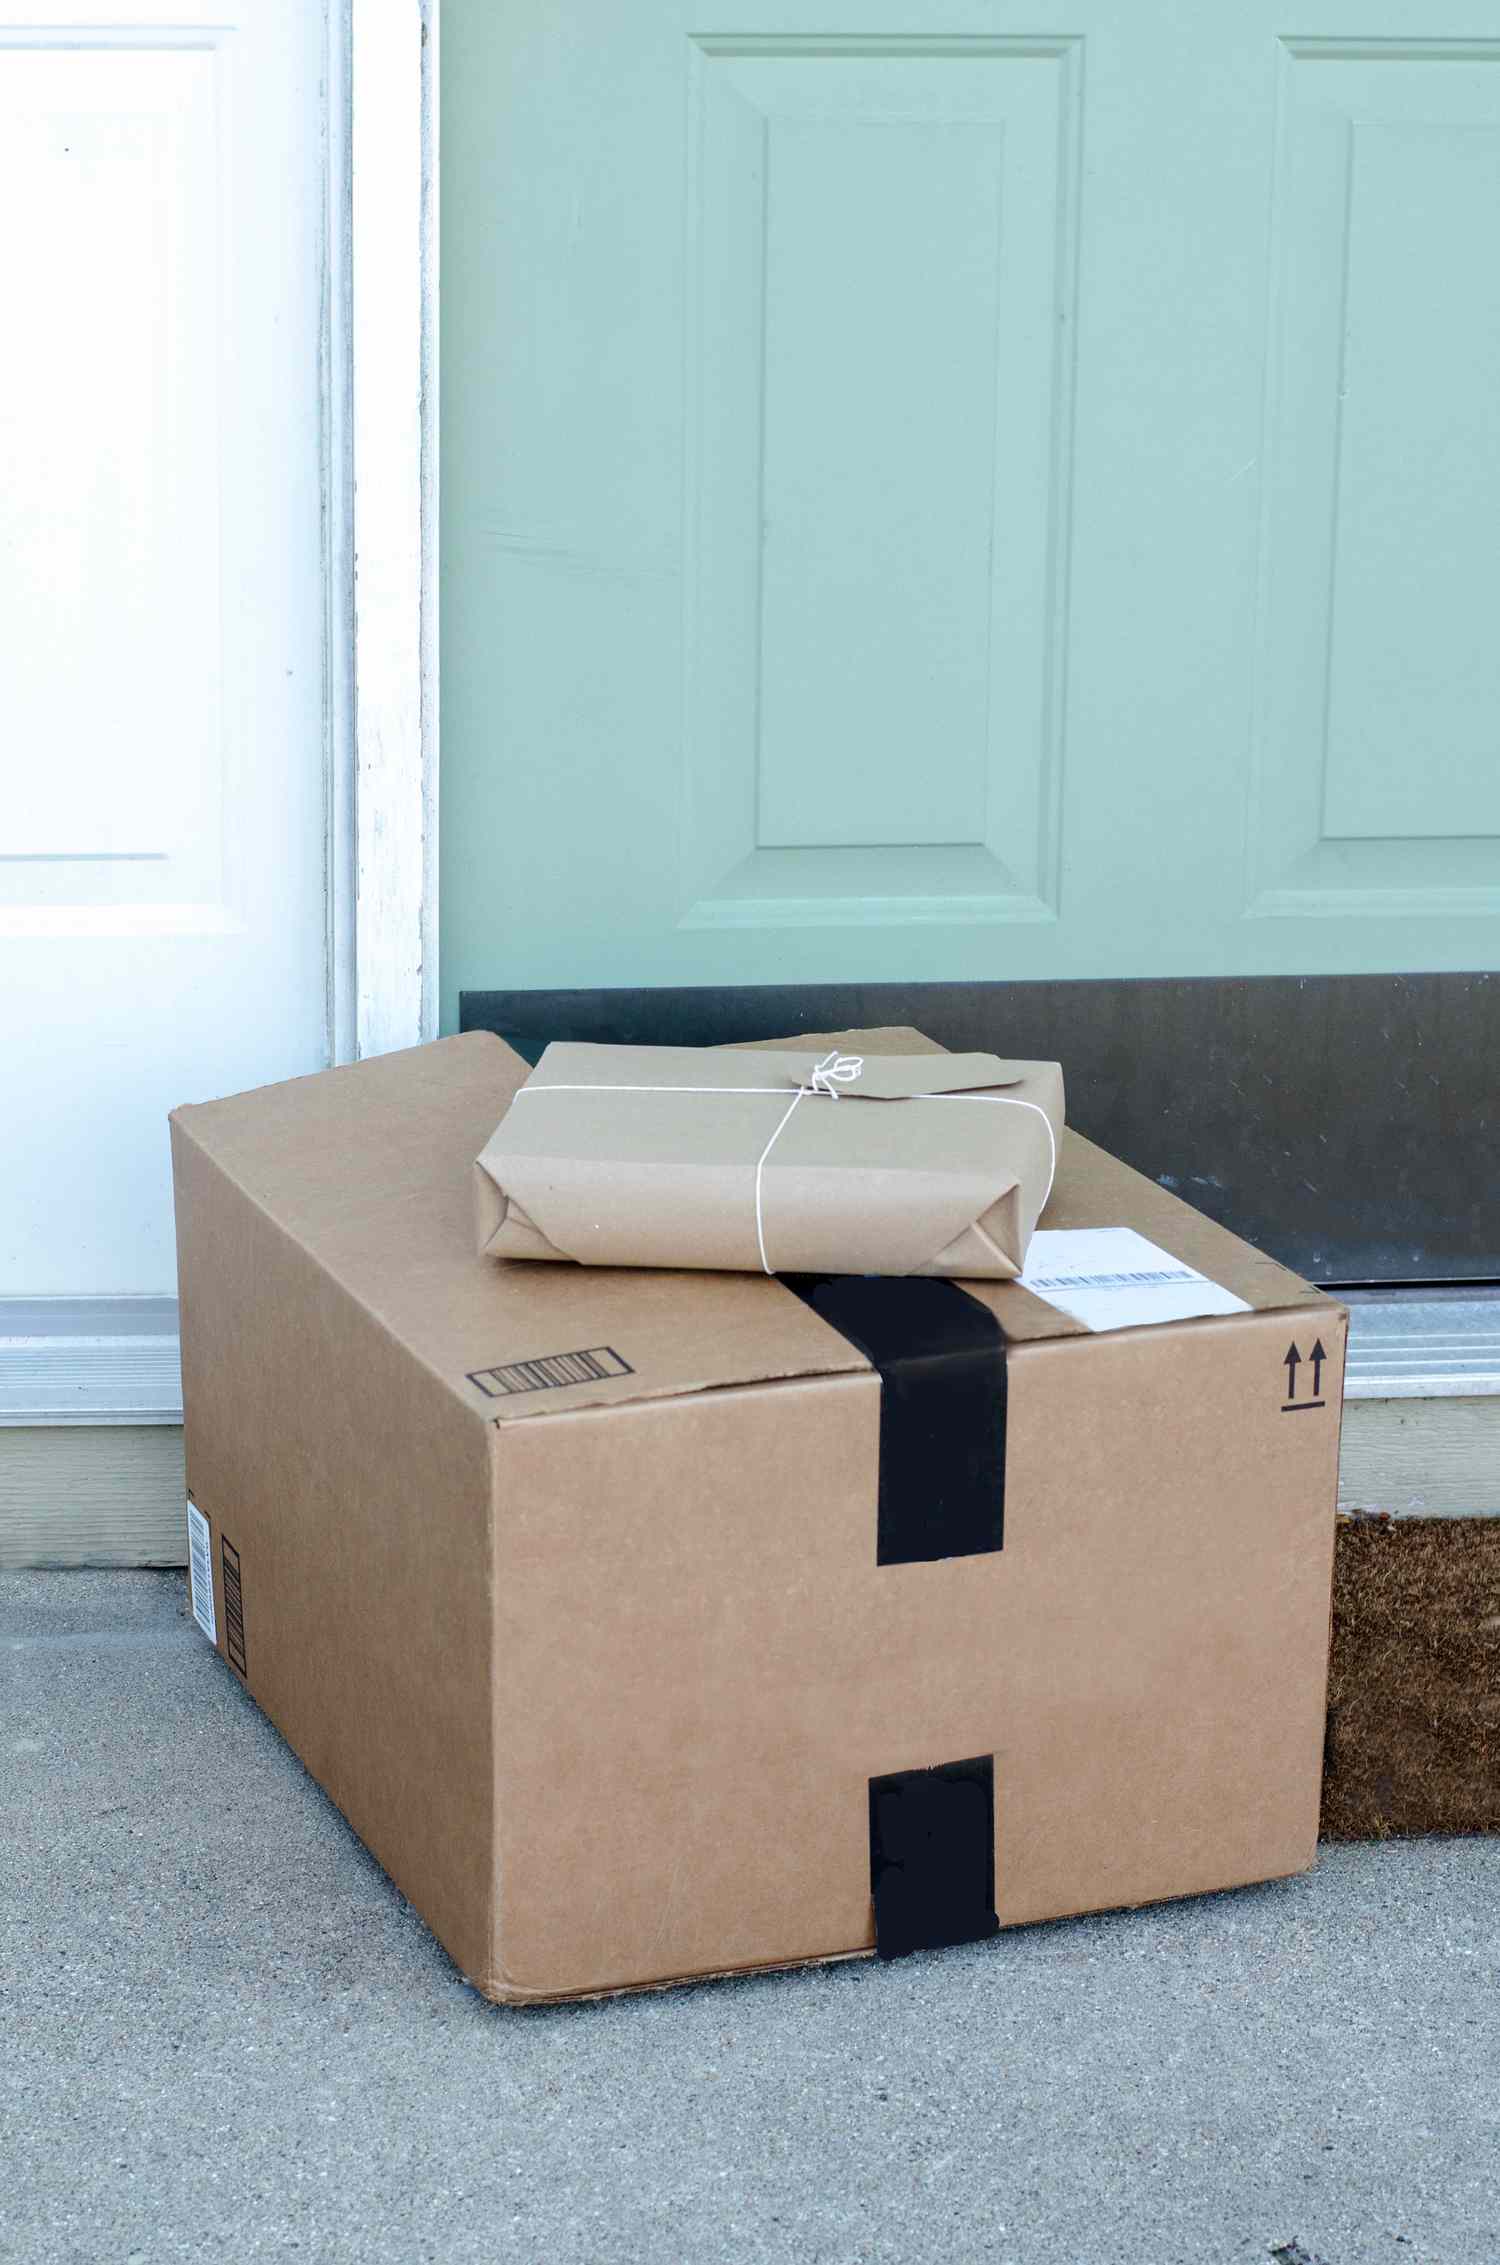 Mint door with packages in front